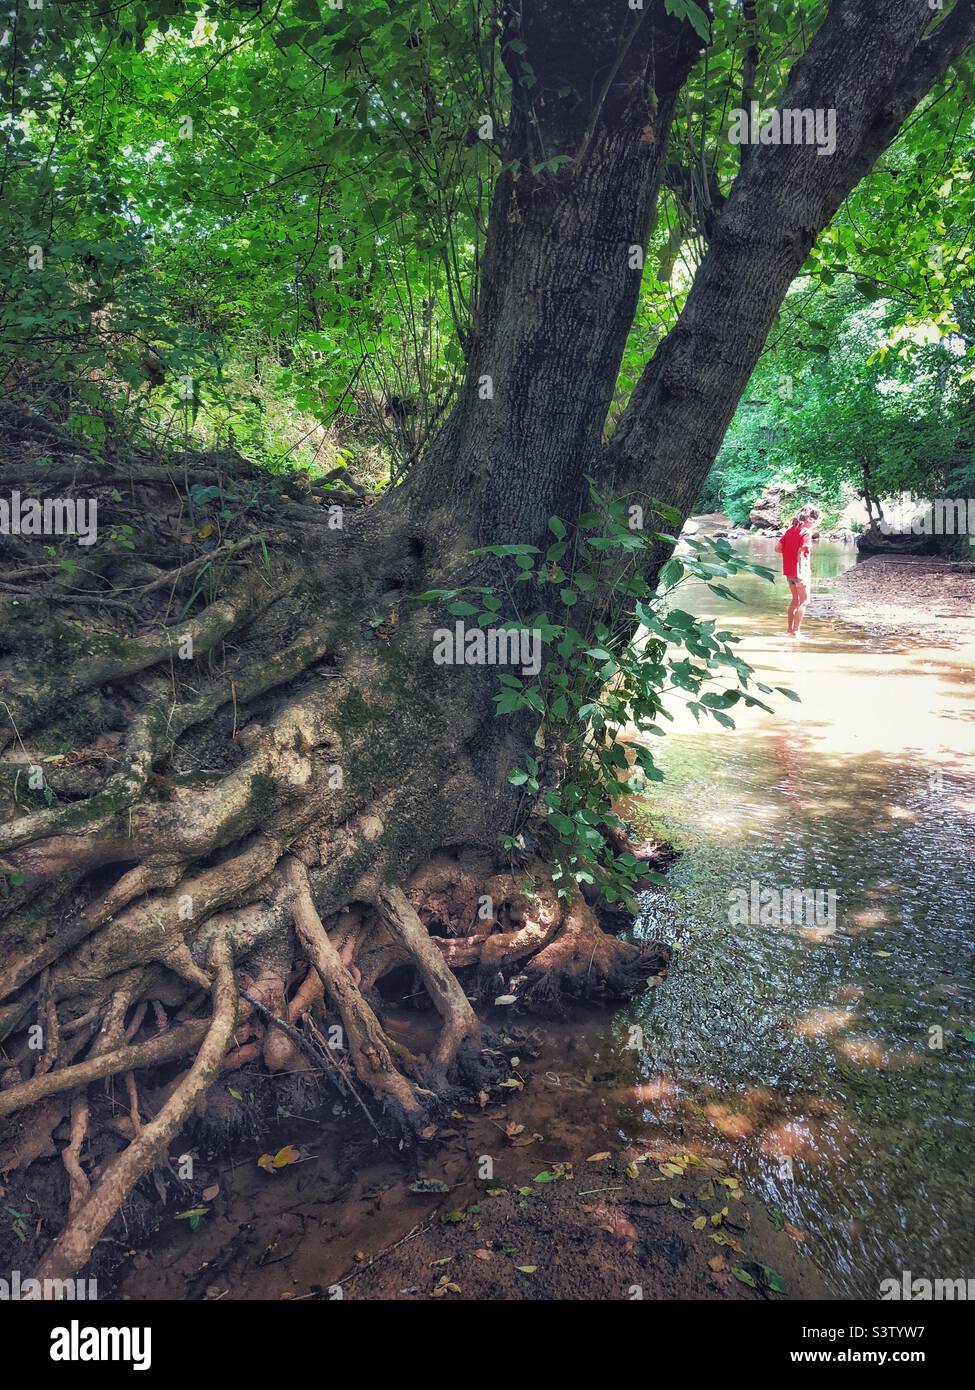 Tree and roots on creek bank, girl in red playing in creek Stock Photo